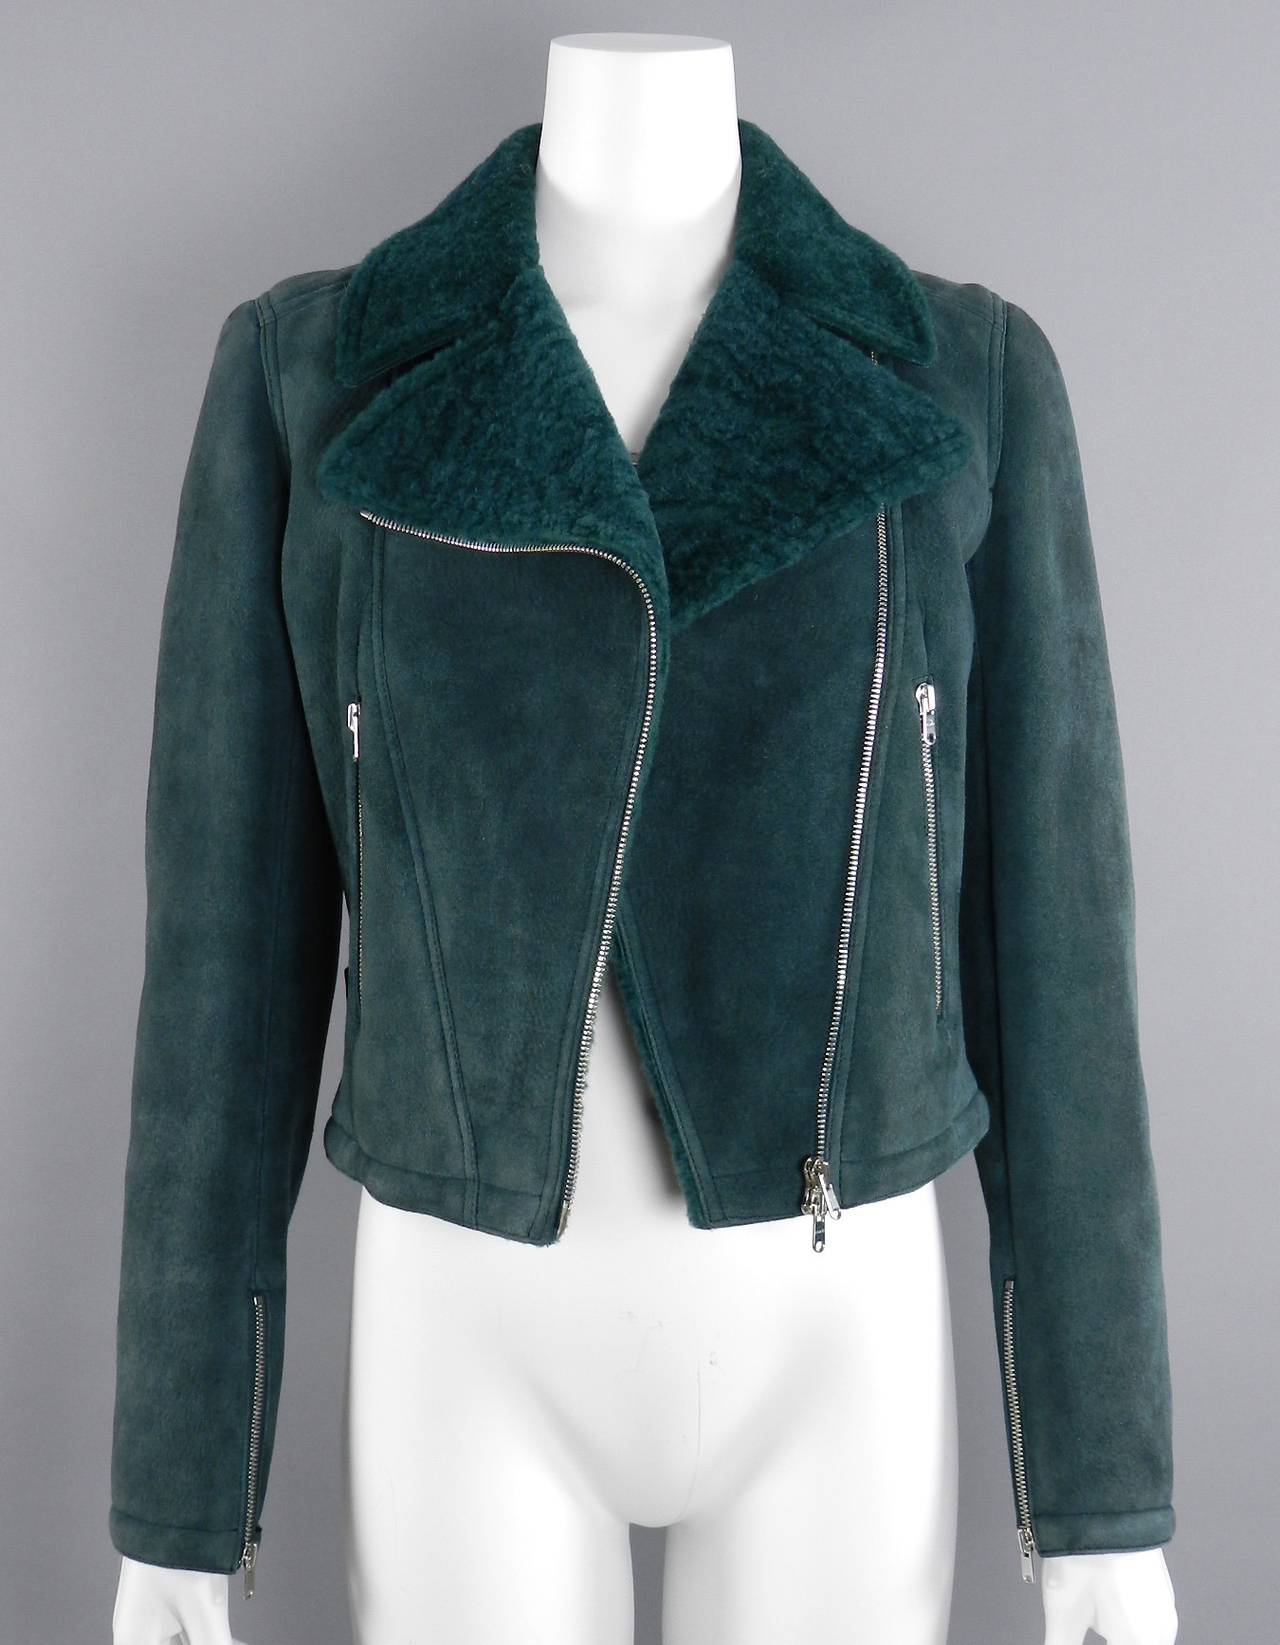 Alaia dark green shearling motorcycle crop jacket. Silvertone zippers.  Excellent pre-owned condition - worn once.  Tagged size Alaia 40 which is about a USA 8 but please note that  Alaia runs small and this will fit a USA 4 / 6 and no larger.